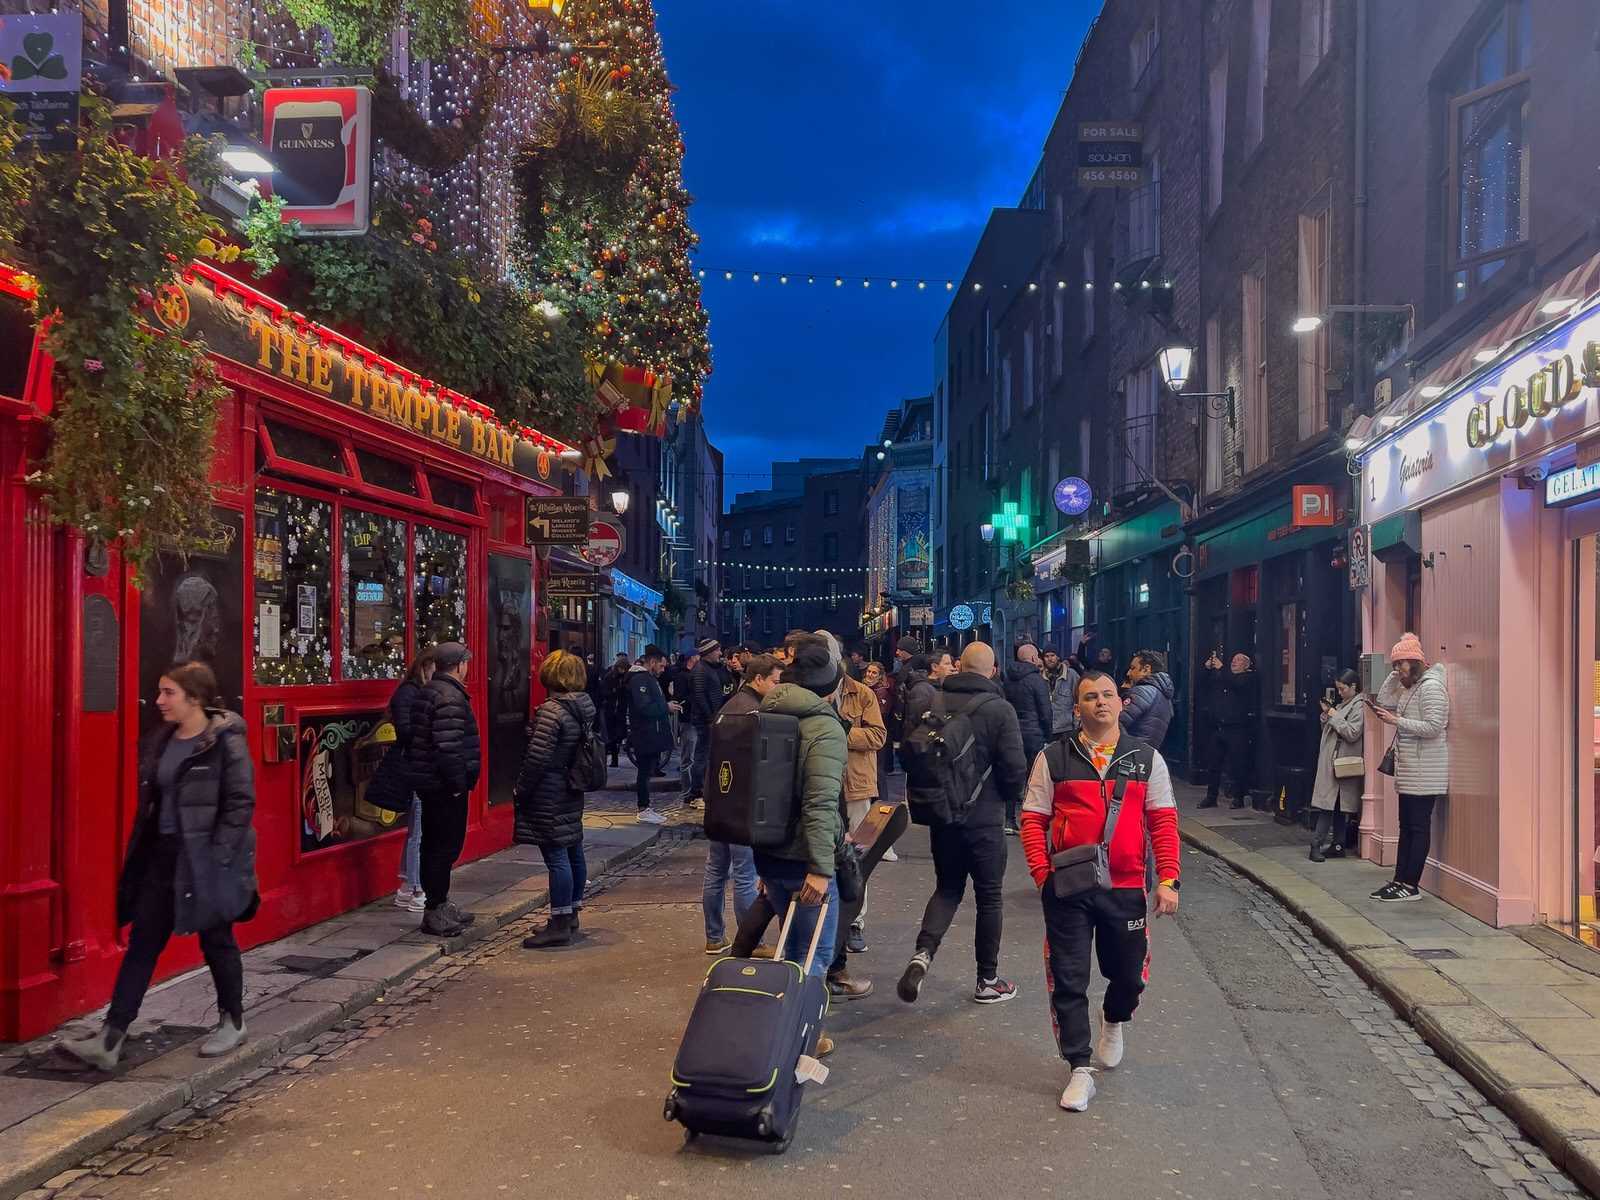 I VISITED TEMPLE BAR TODAY [AS NIGHTFALL WAS APPROACHING]-225351-1